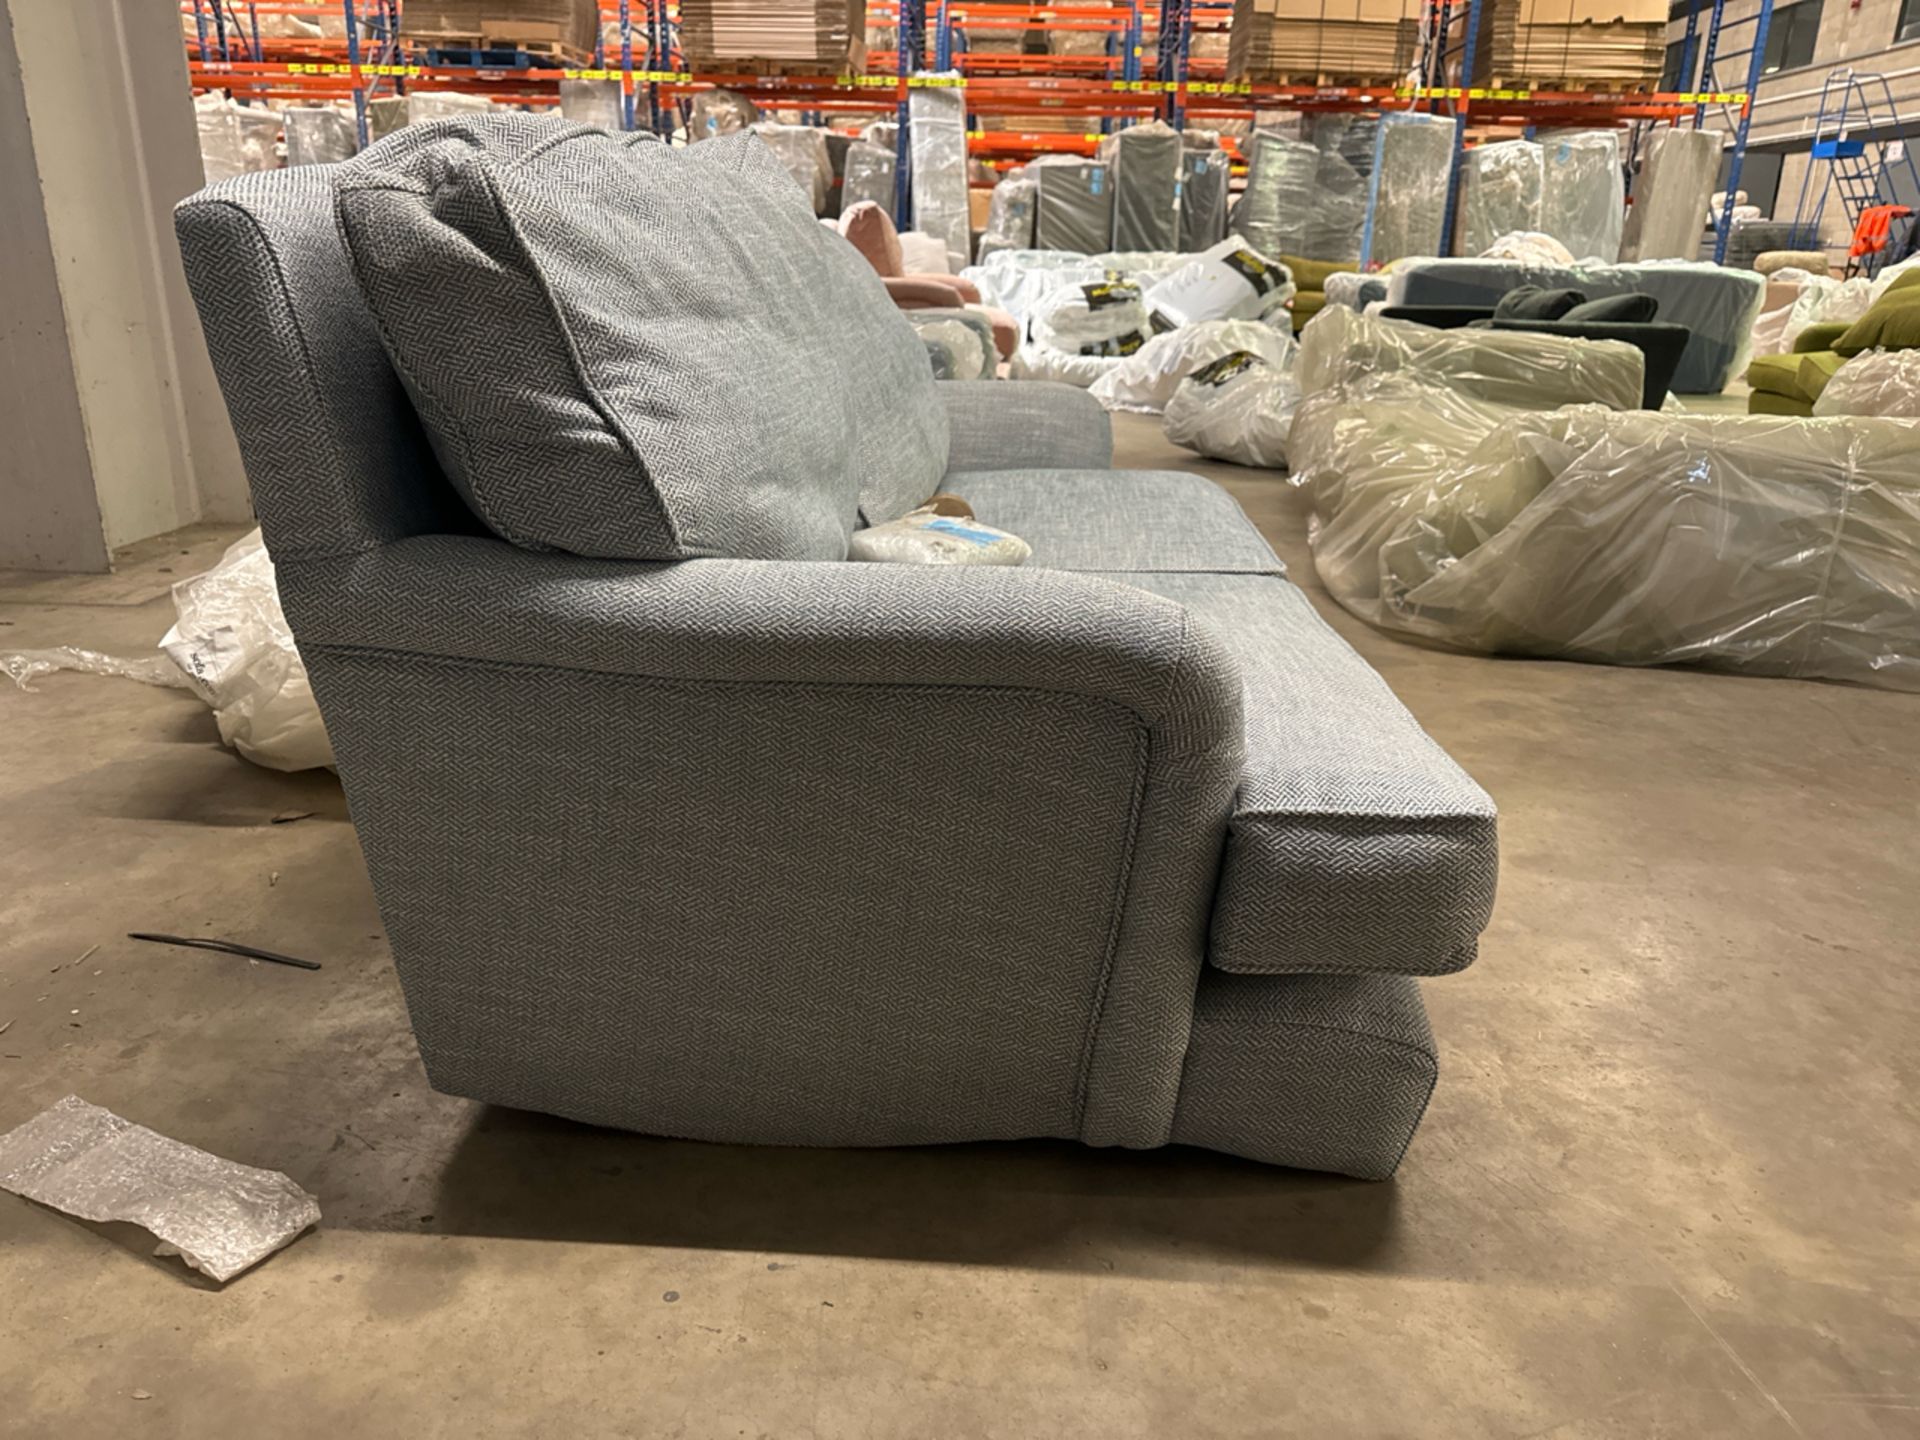 Bluebell 2.5 Seat Sofabed - Image 3 of 6